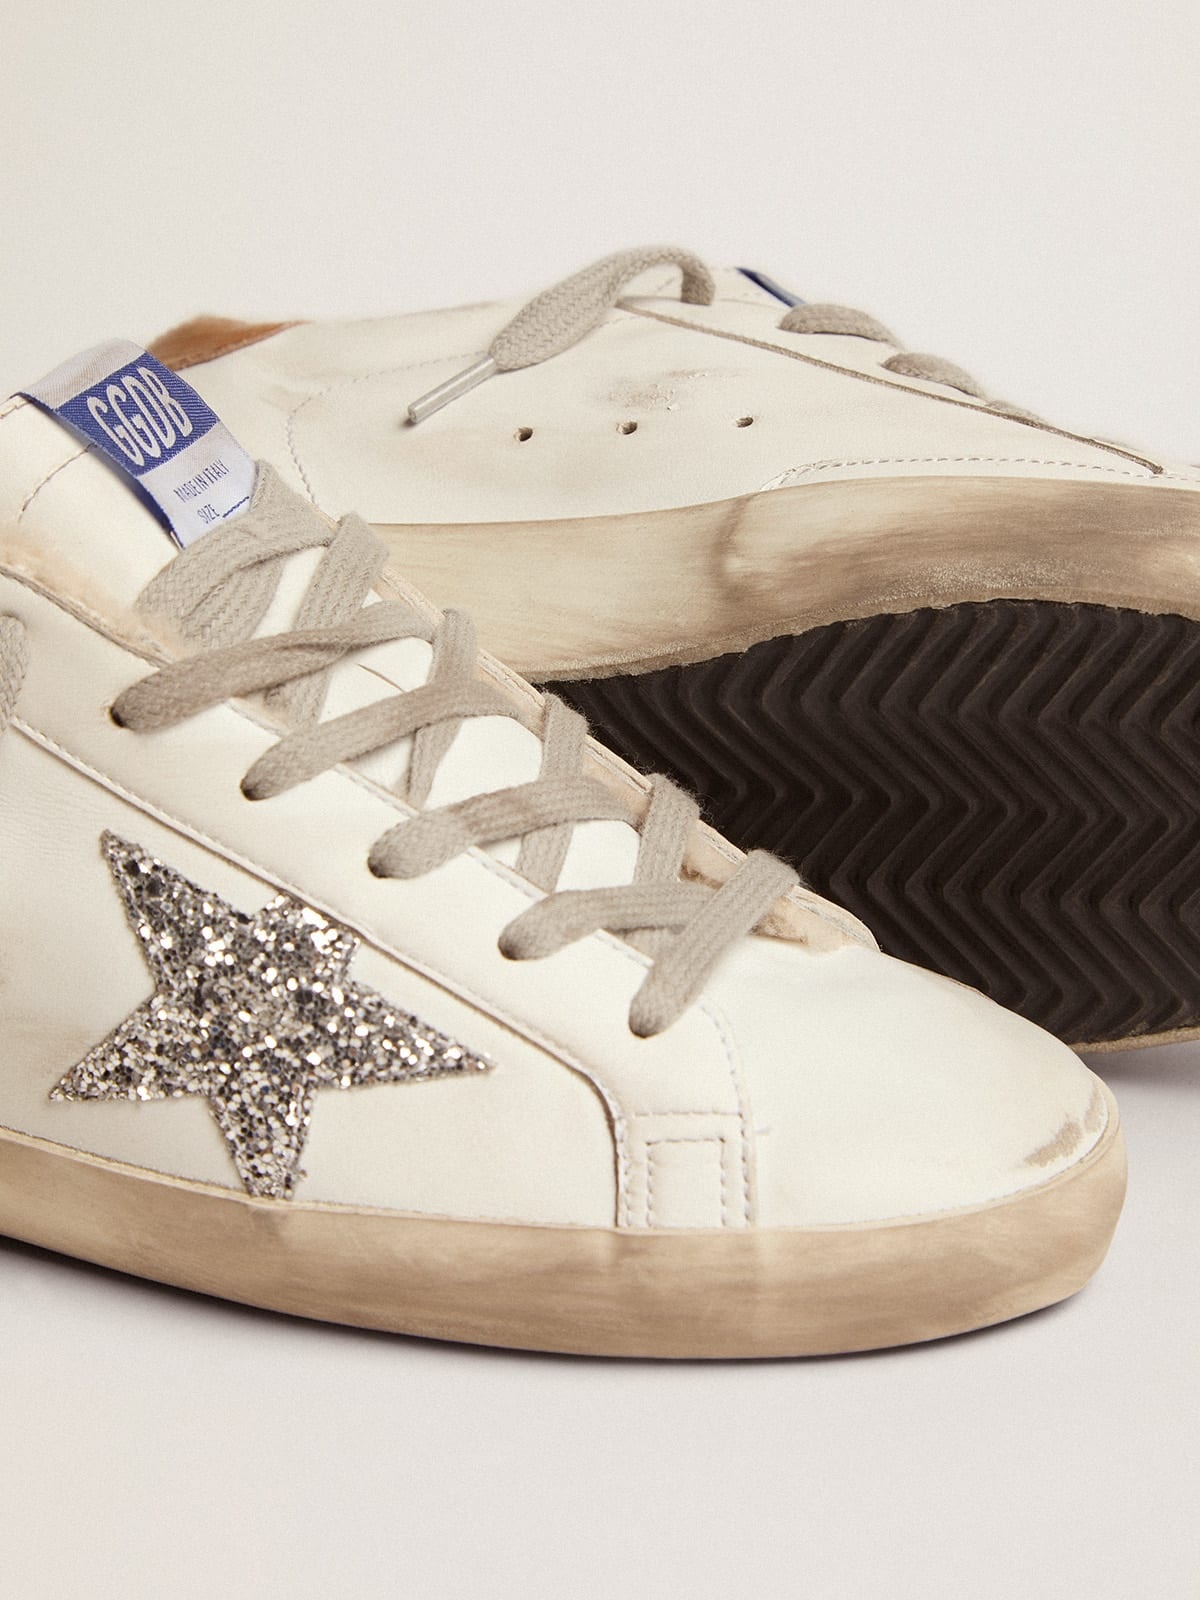 Super-Star sneakers with shearling lining, silver glitter star and lizard-print dove-gray leather he - 4